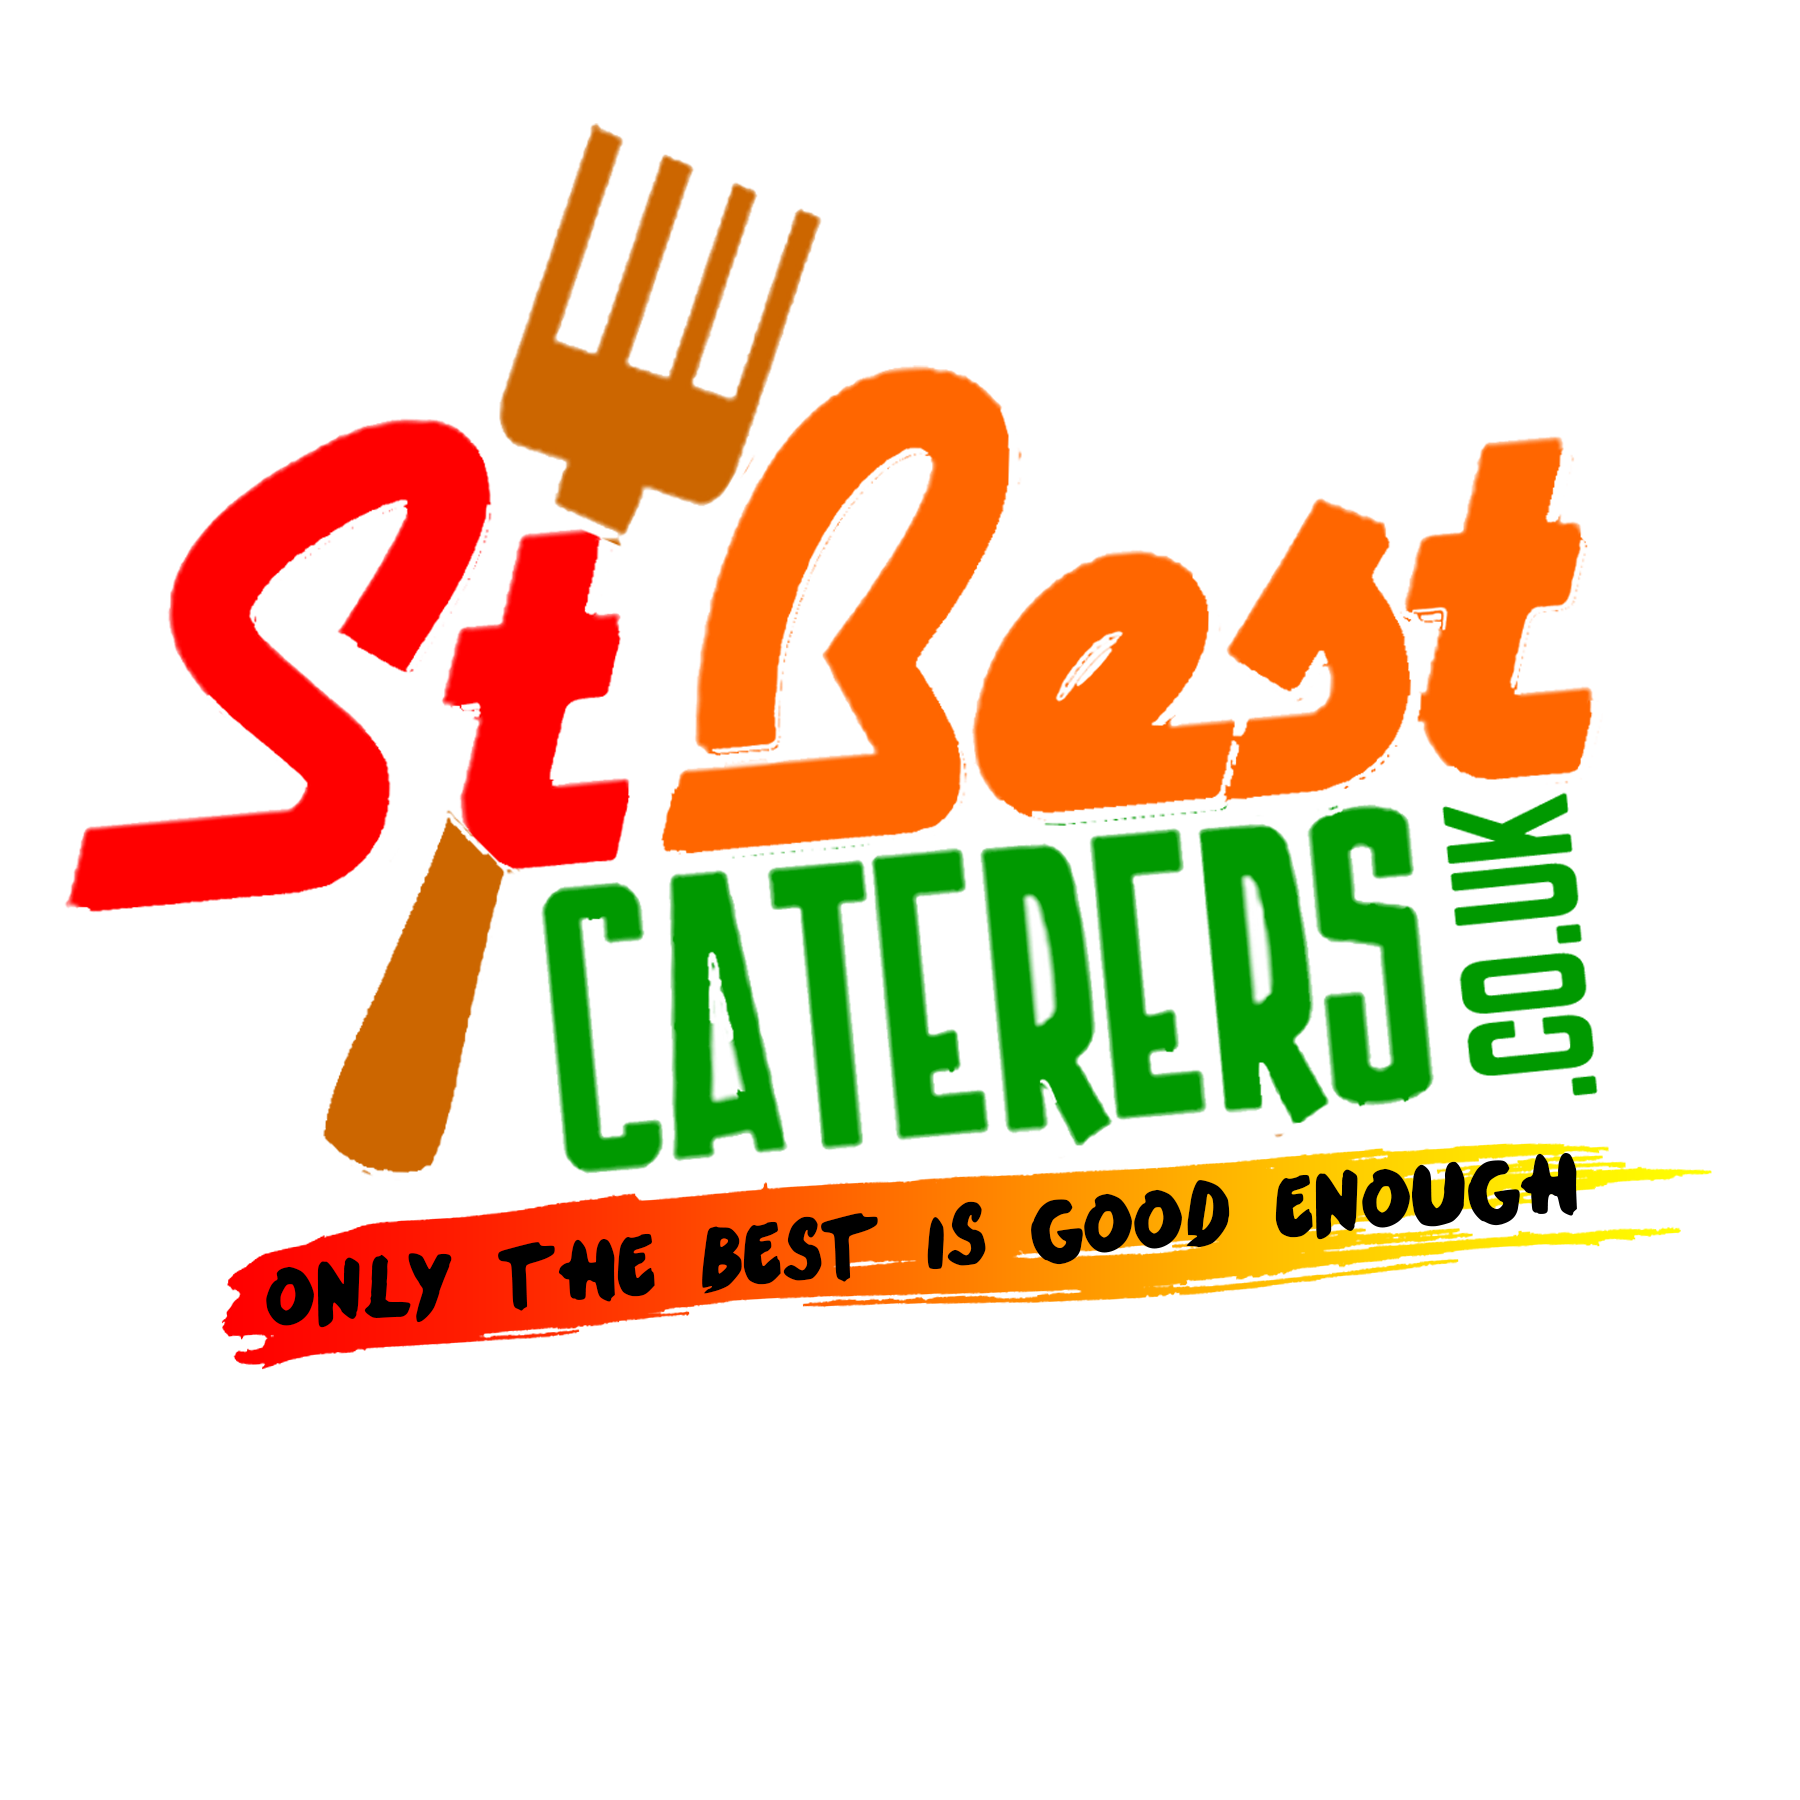 We bring top quality food to you. We do street food, event catering, all functions etc..
We provide the best in Caribbean cuisine .
stbestcaterers@gmail.com